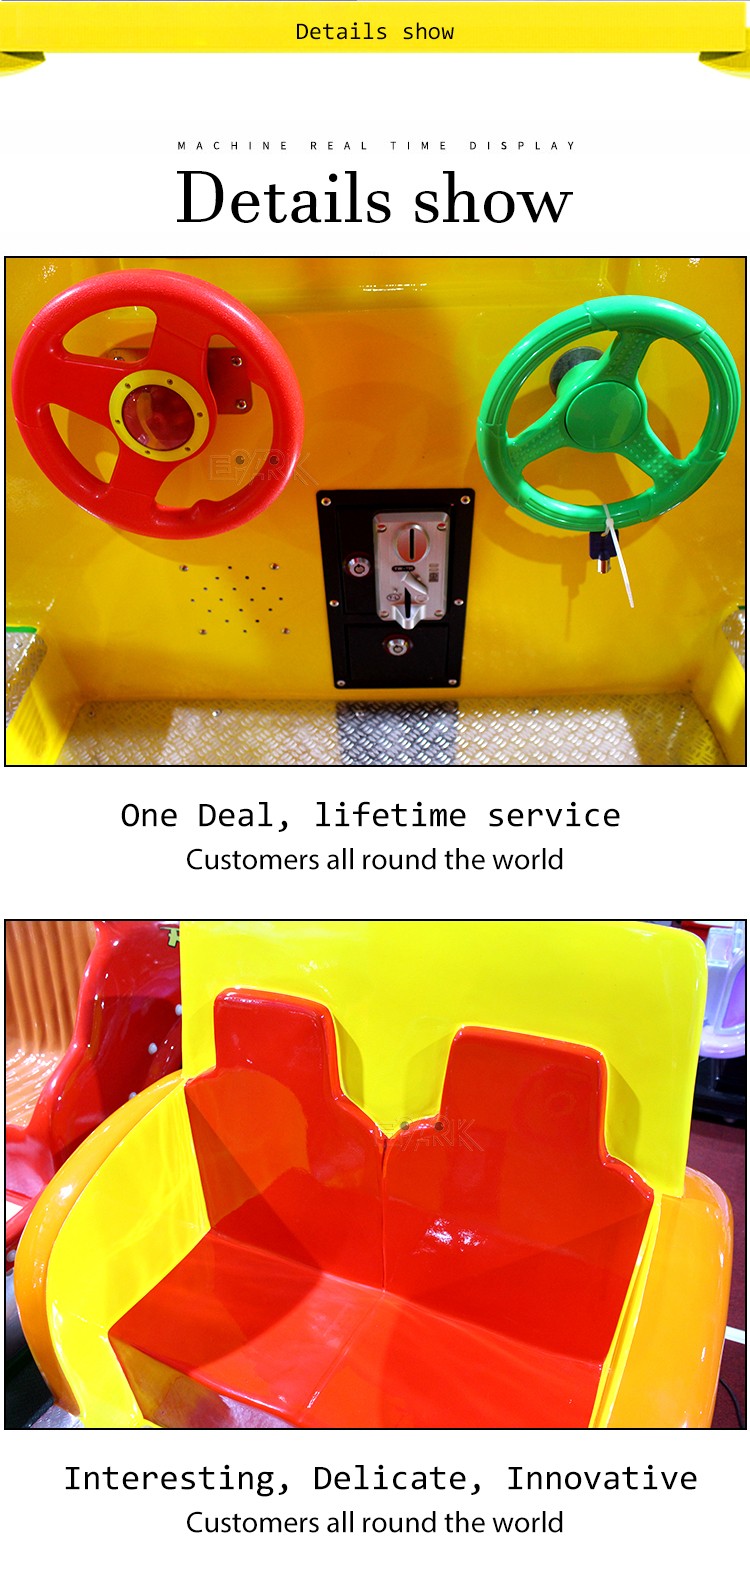 Theme Park Equipment Kids Ride On Car Swing Car Game Machine Coin Operated Kiddie Rides